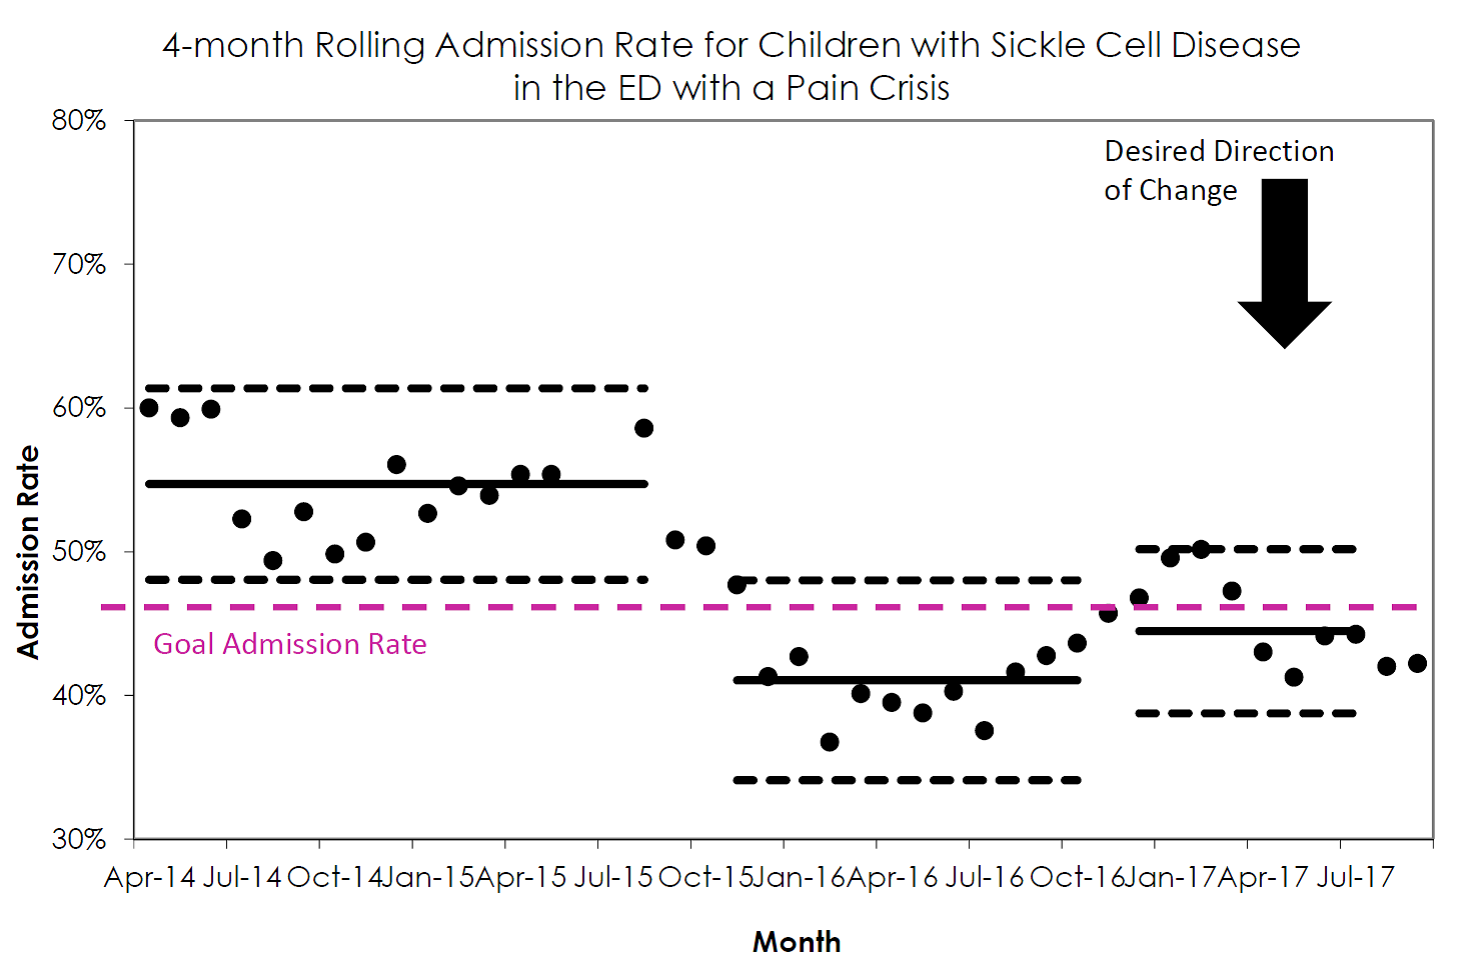 4 month rolling admission rate for children with sickle cell disease in the ED with a pain crisis graph